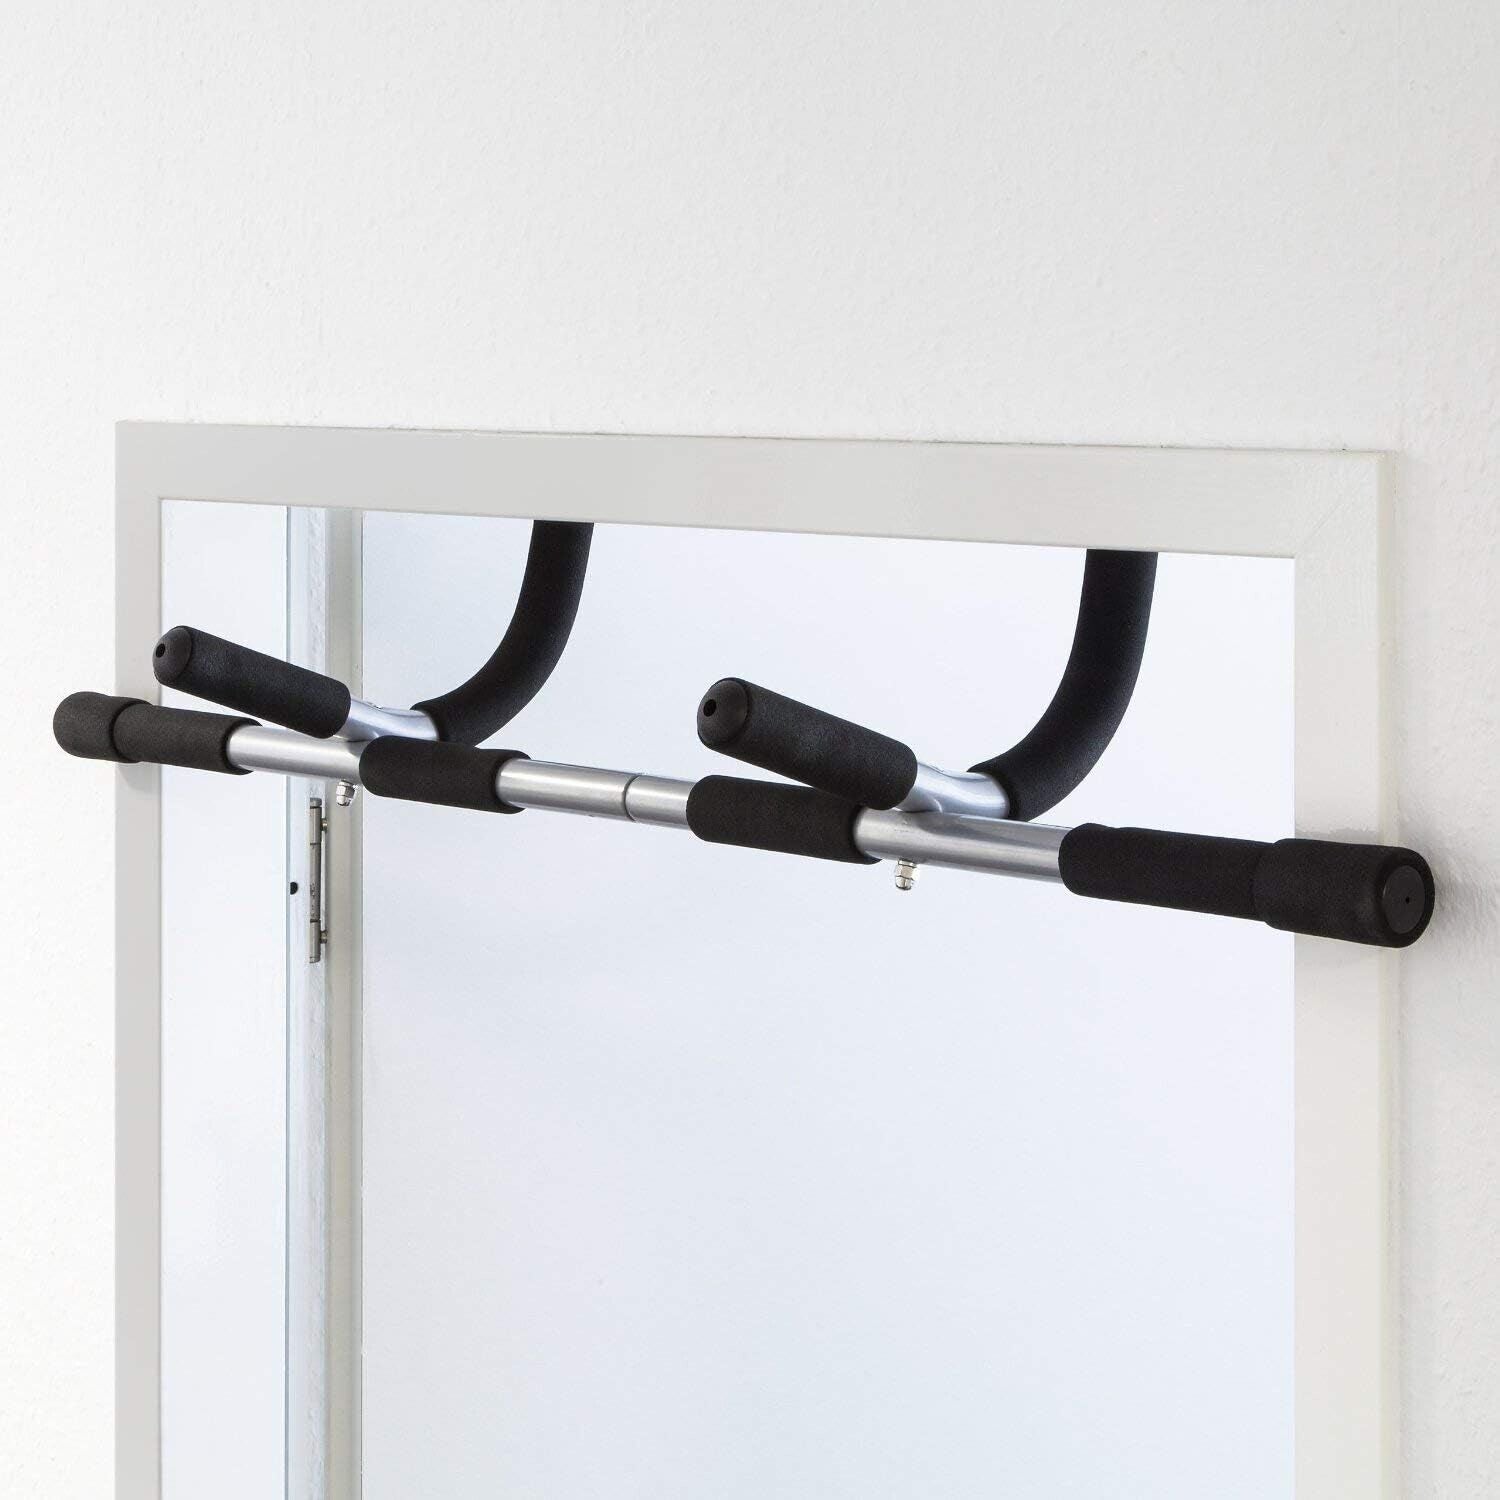 Pull Up Bar For Home Doorway, Chin Up Exterior Door Mounted Exercise